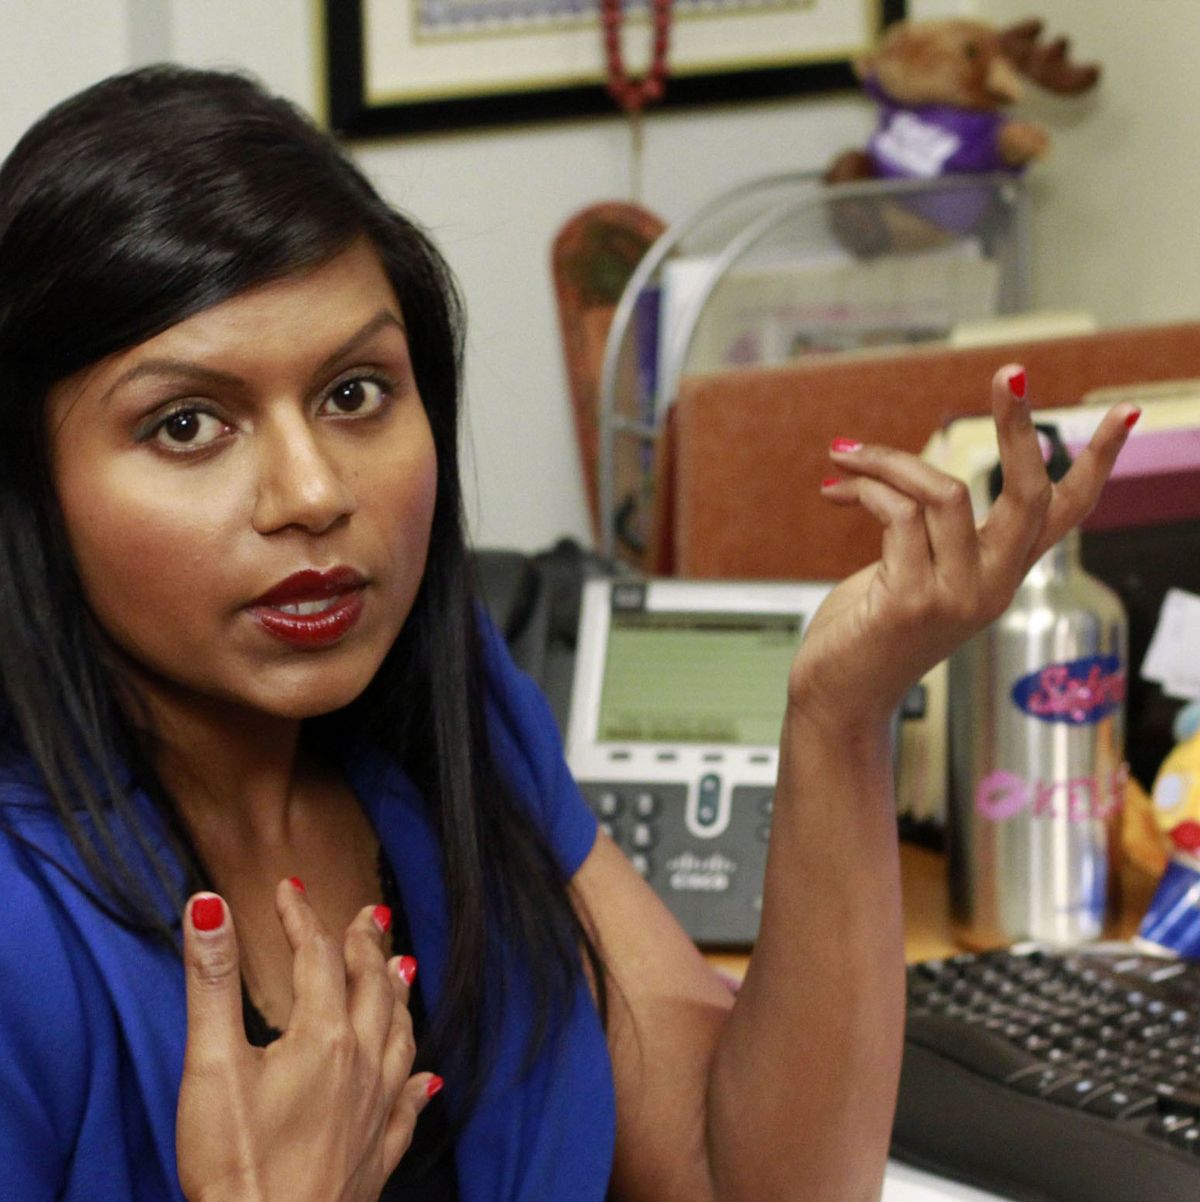 The Office star Mindy Kaling says the show is 'so inappropriate now'